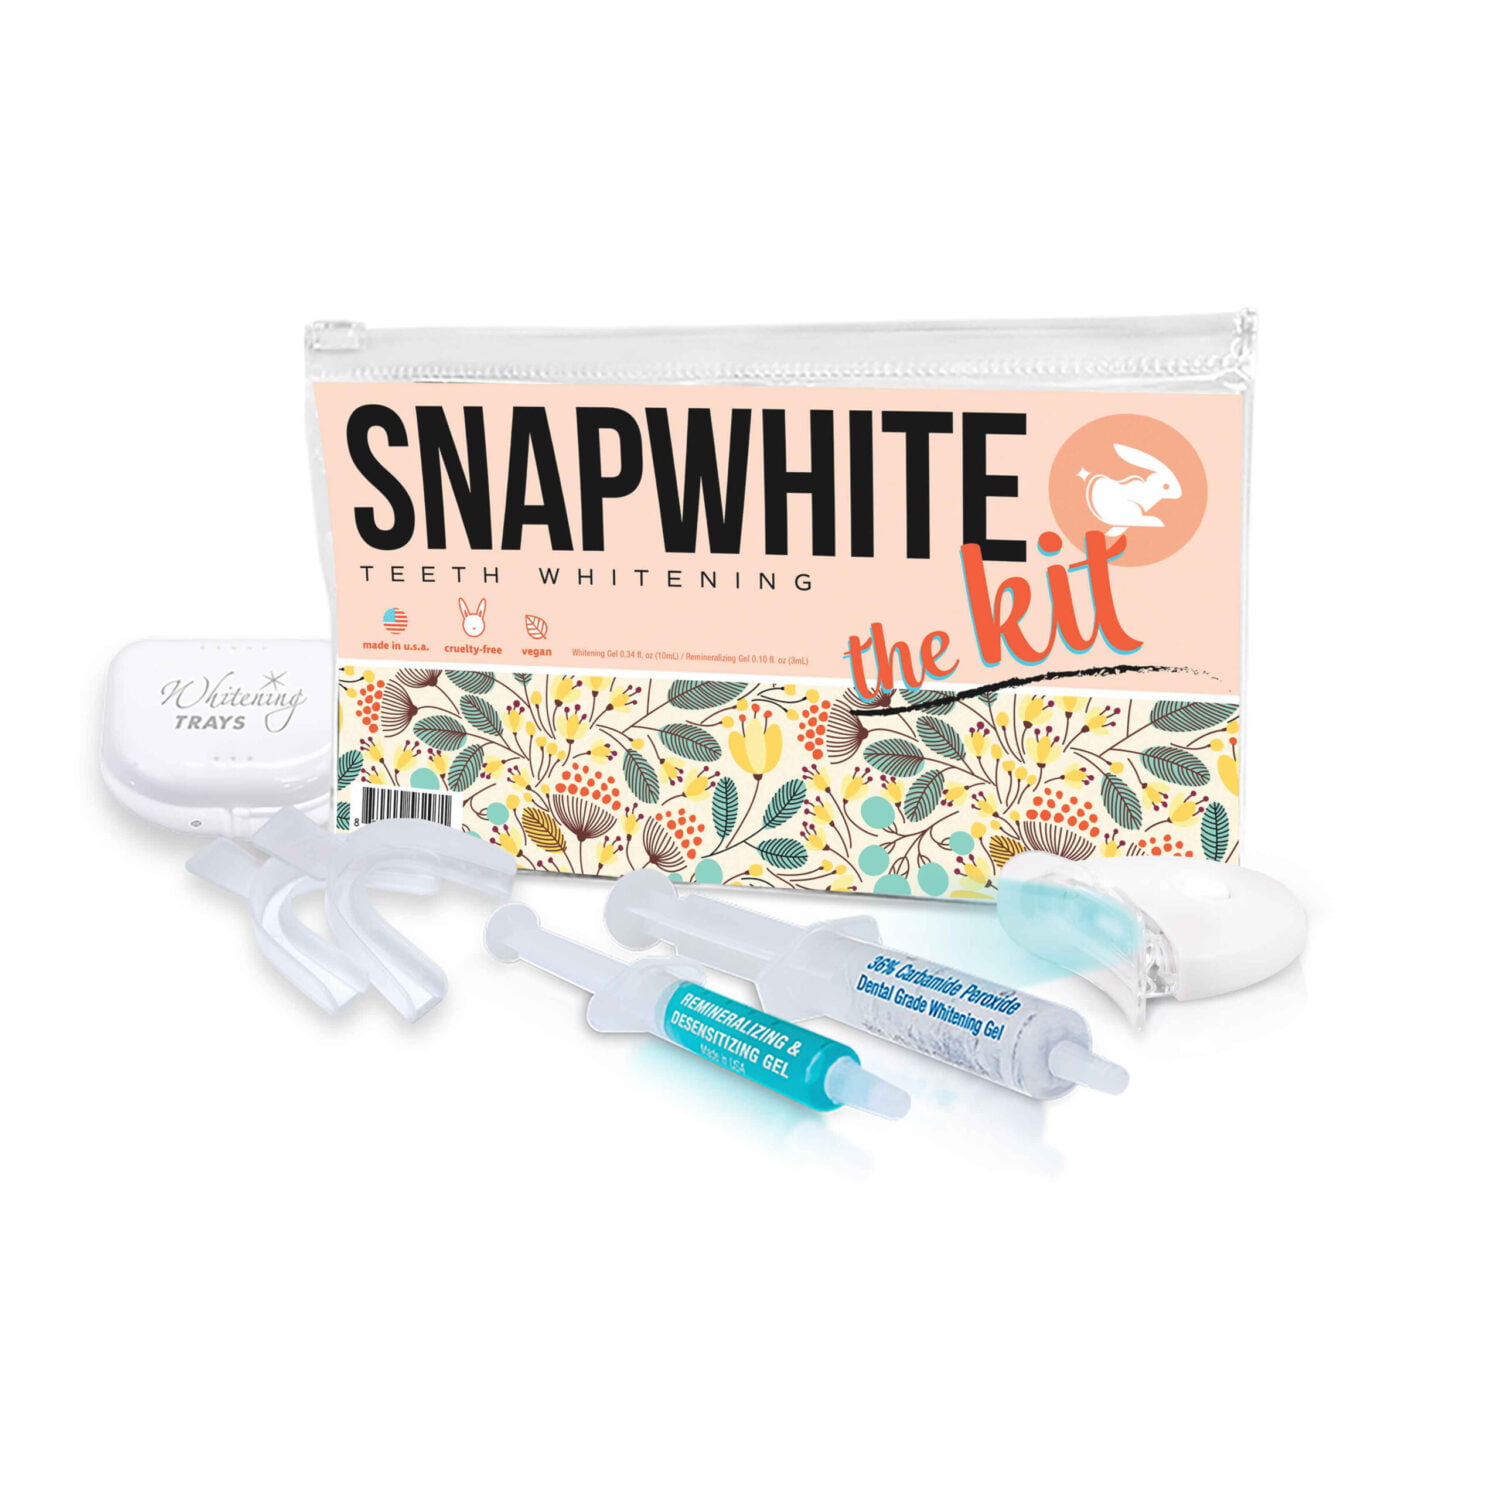 SnapWhite "The Kit" Home Teeth Whitening System Teeth whitening products Home teeth whitening